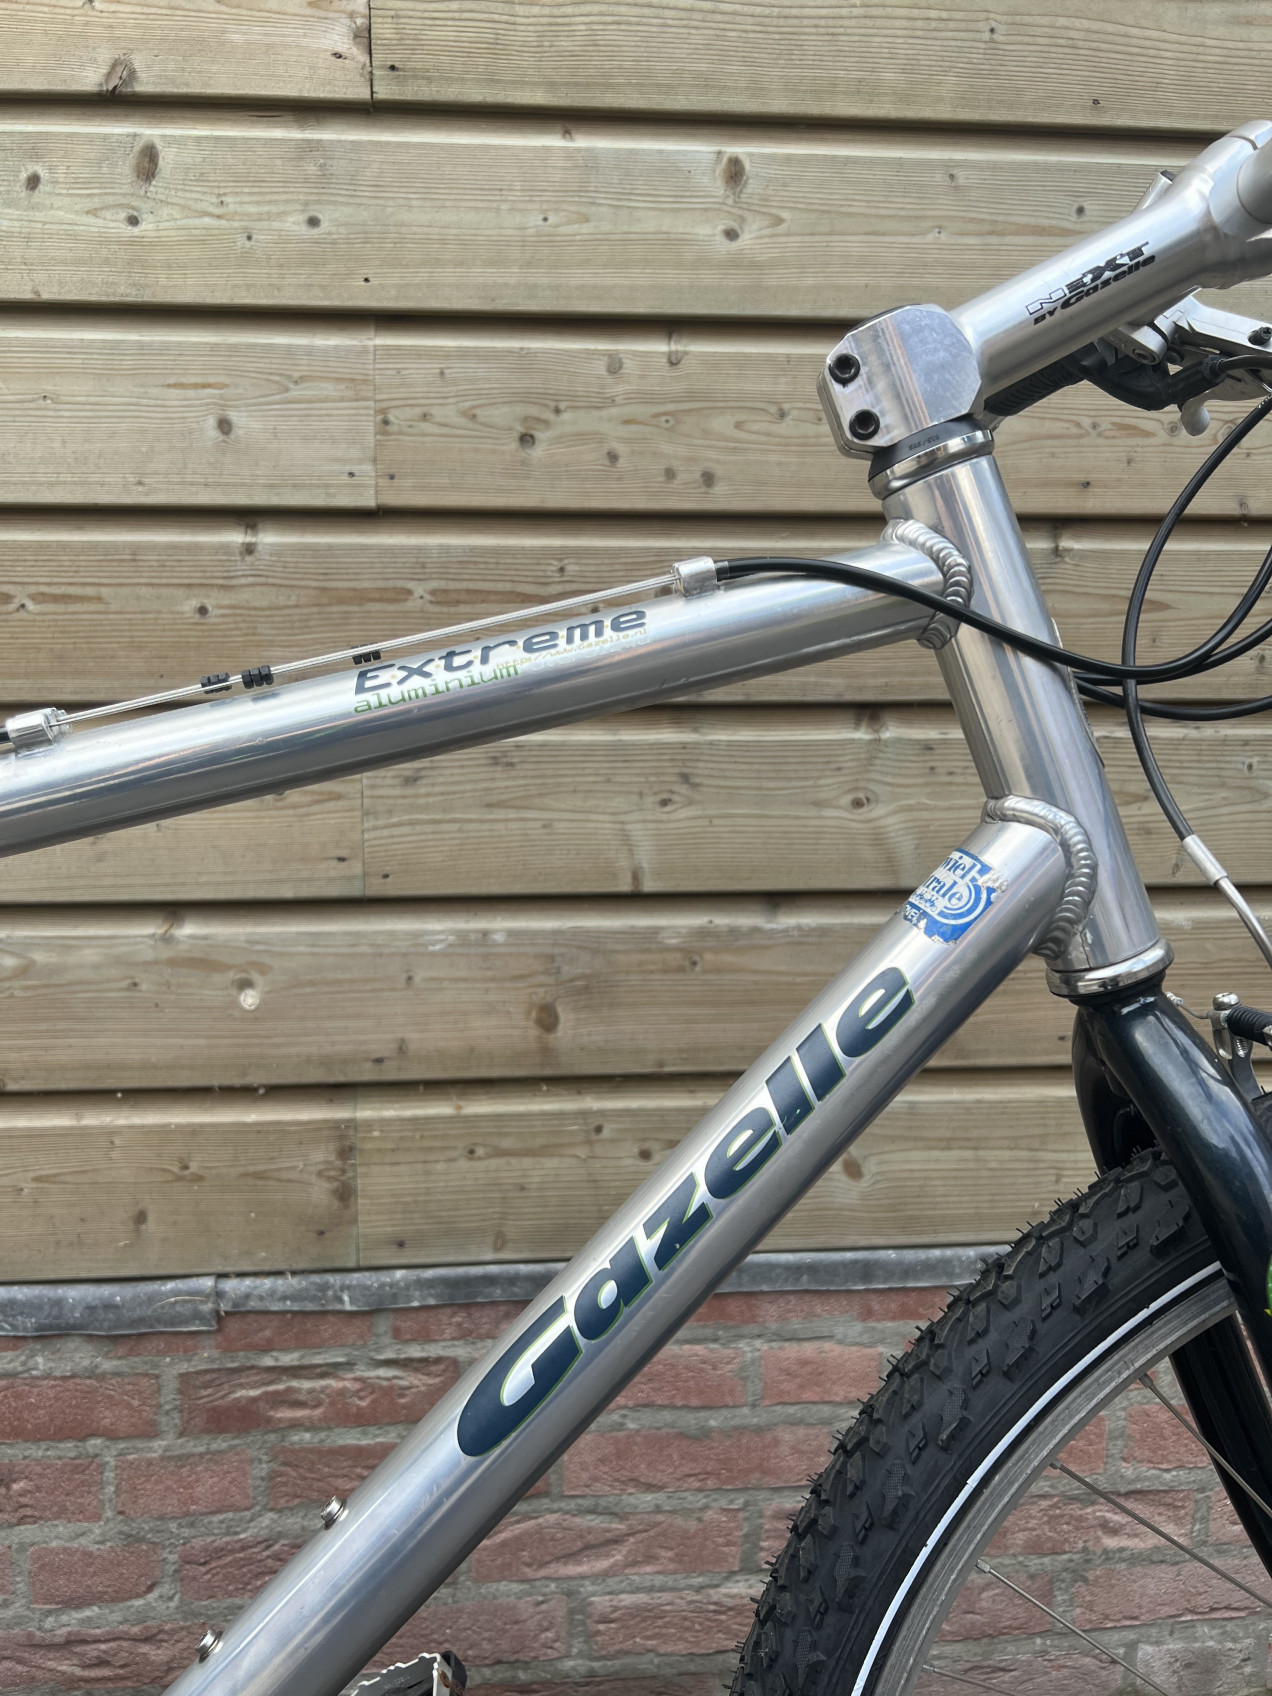 Plicht industrie Voldoen Gazelle Extreme used in 56 cm | buycycle